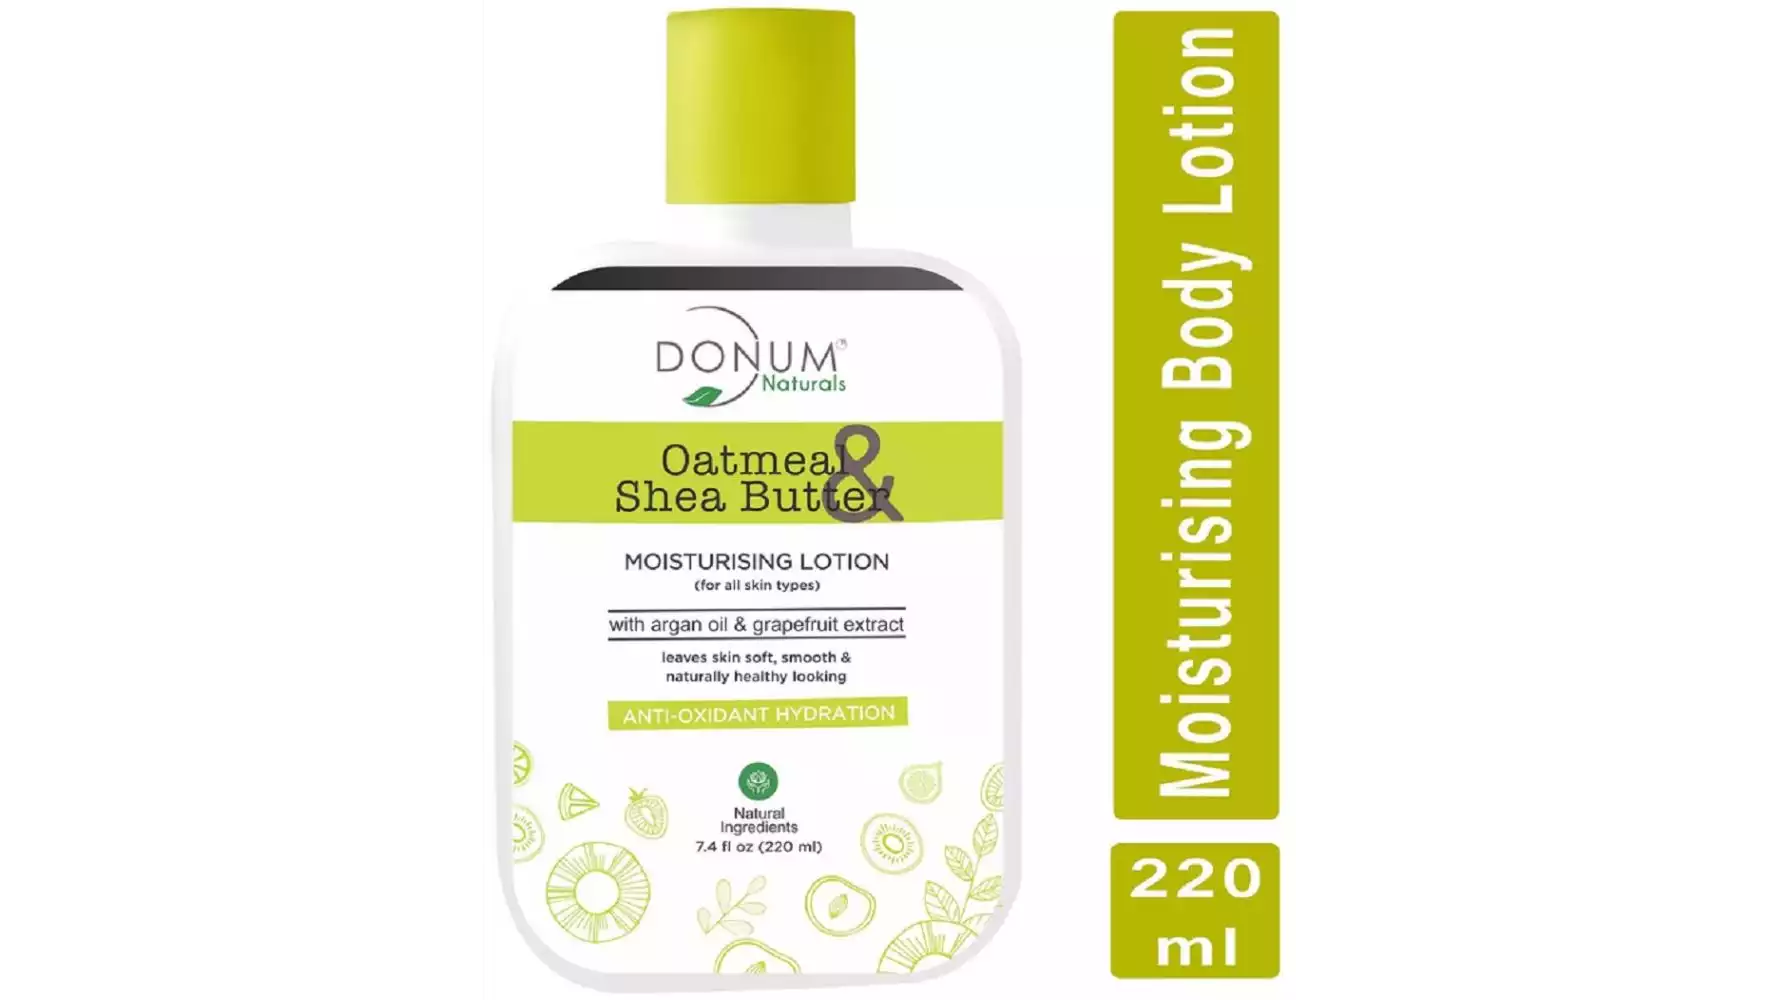 Donum Naturals Deep Moisturizing And Skin Brightening Body Lotion With Oatmeal And Shea Butter For Silky Smooth Skin (Paraben-Free) (220ml)